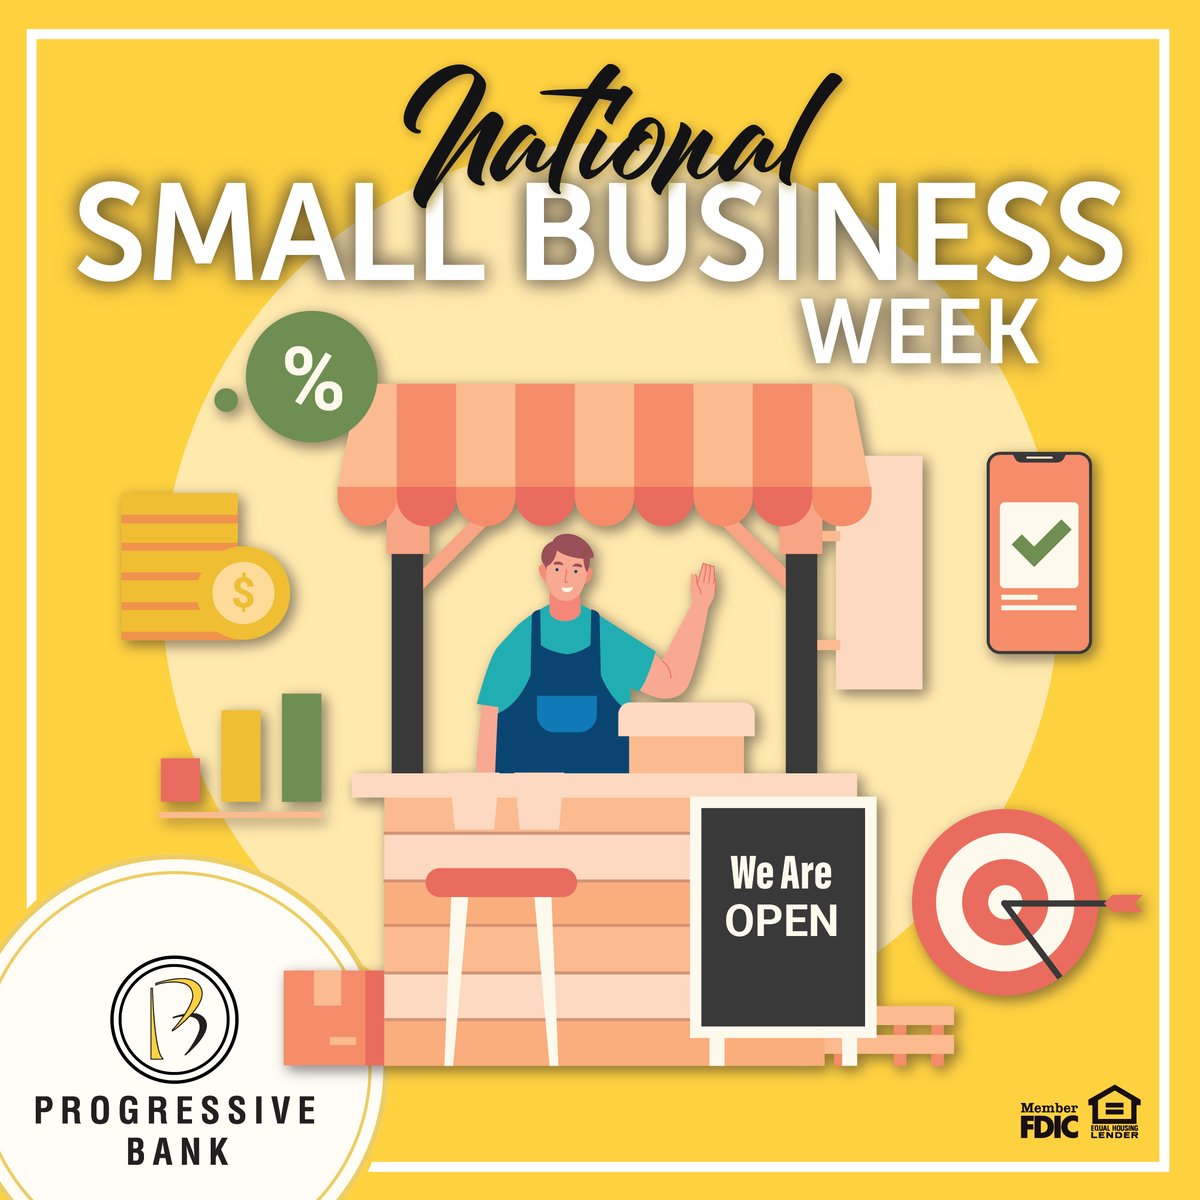 It's National Small Business Week! From paying your employees, to remote check deposits and beyond, we have secure and convenient solutions for every business need.

Learn more: bit.ly/3x9V3uq

#ProgressiveBank #LocalBank